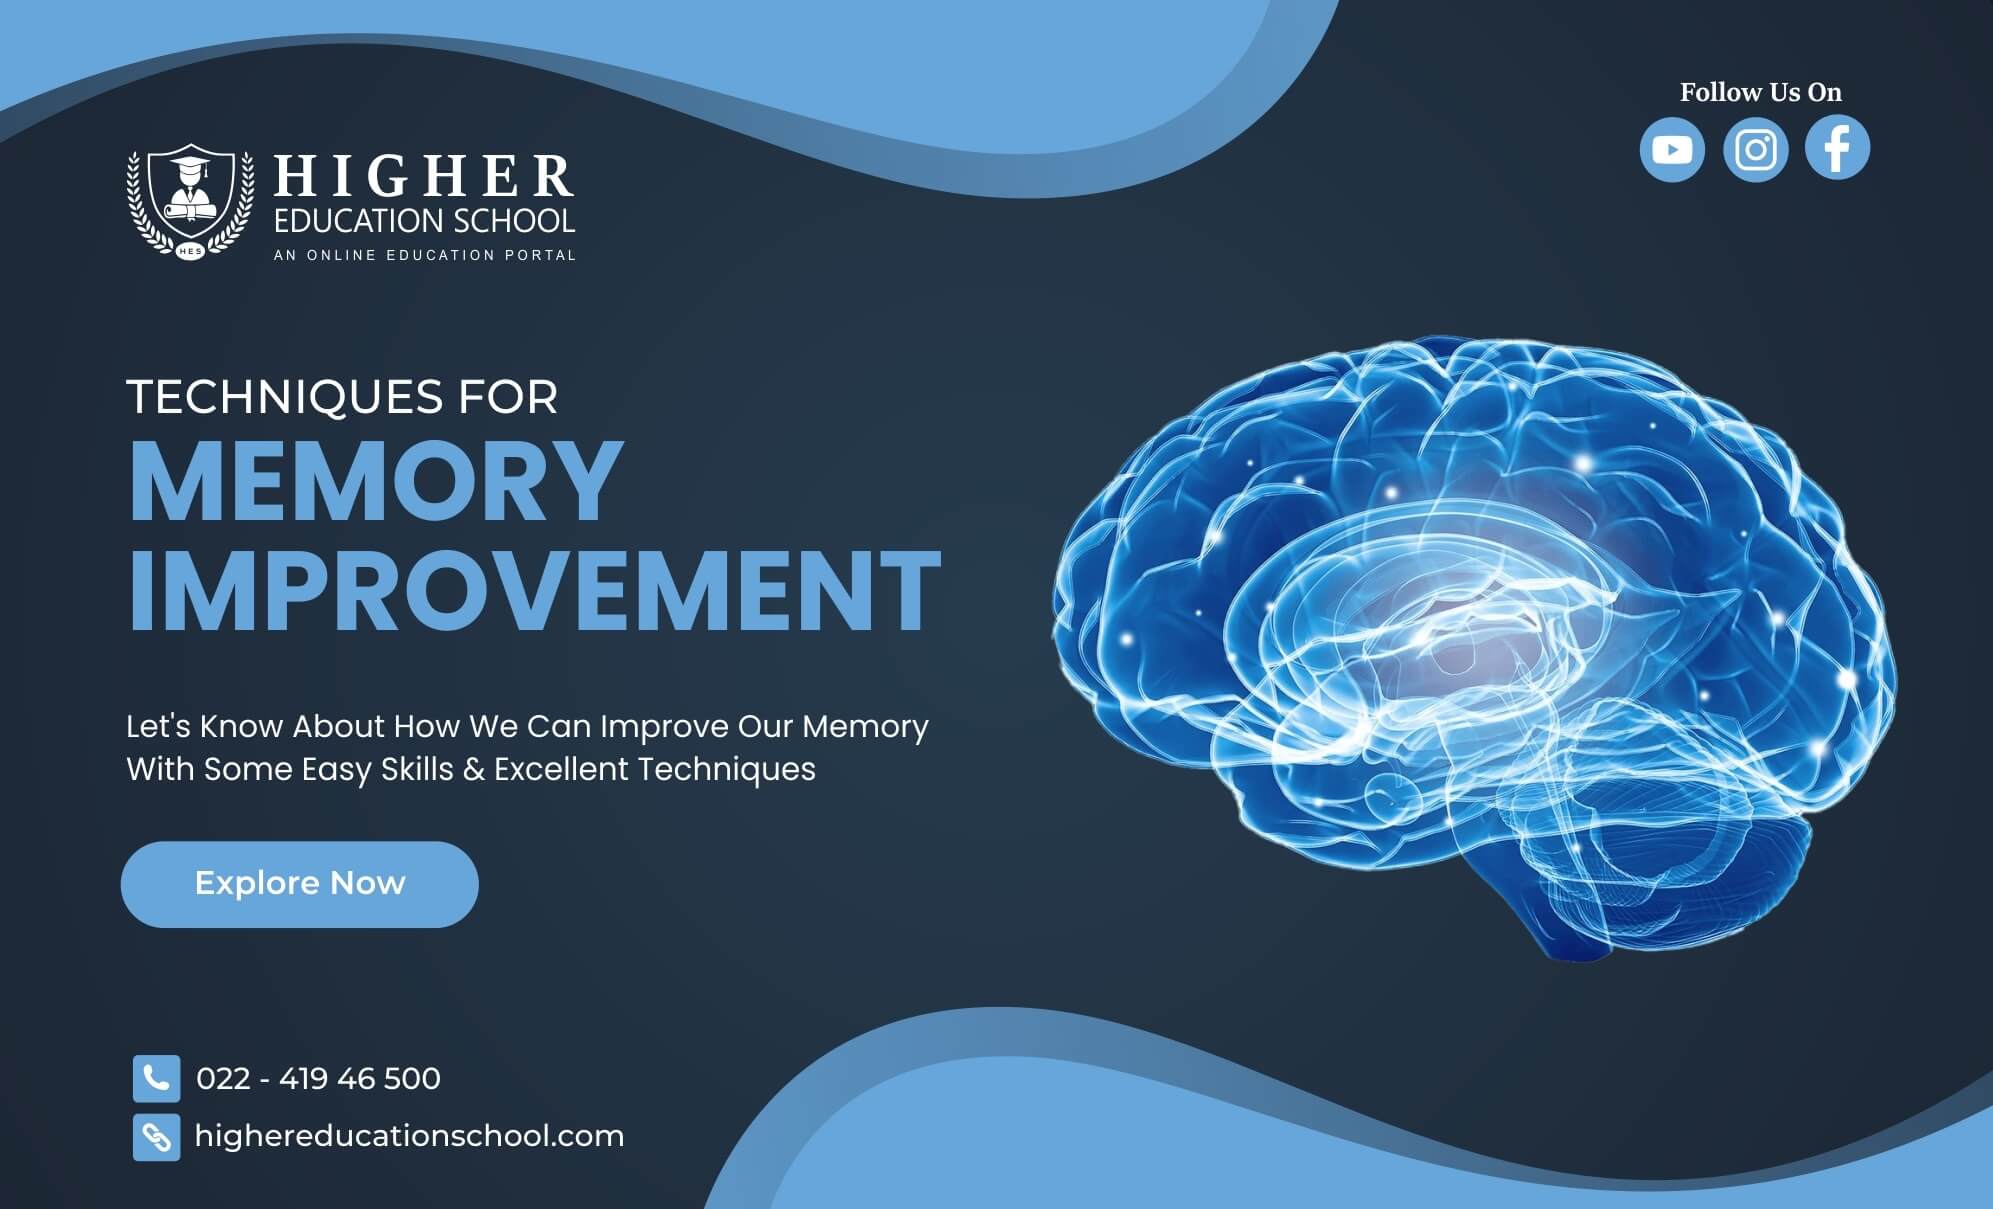 research findings indicate an improvement in memory